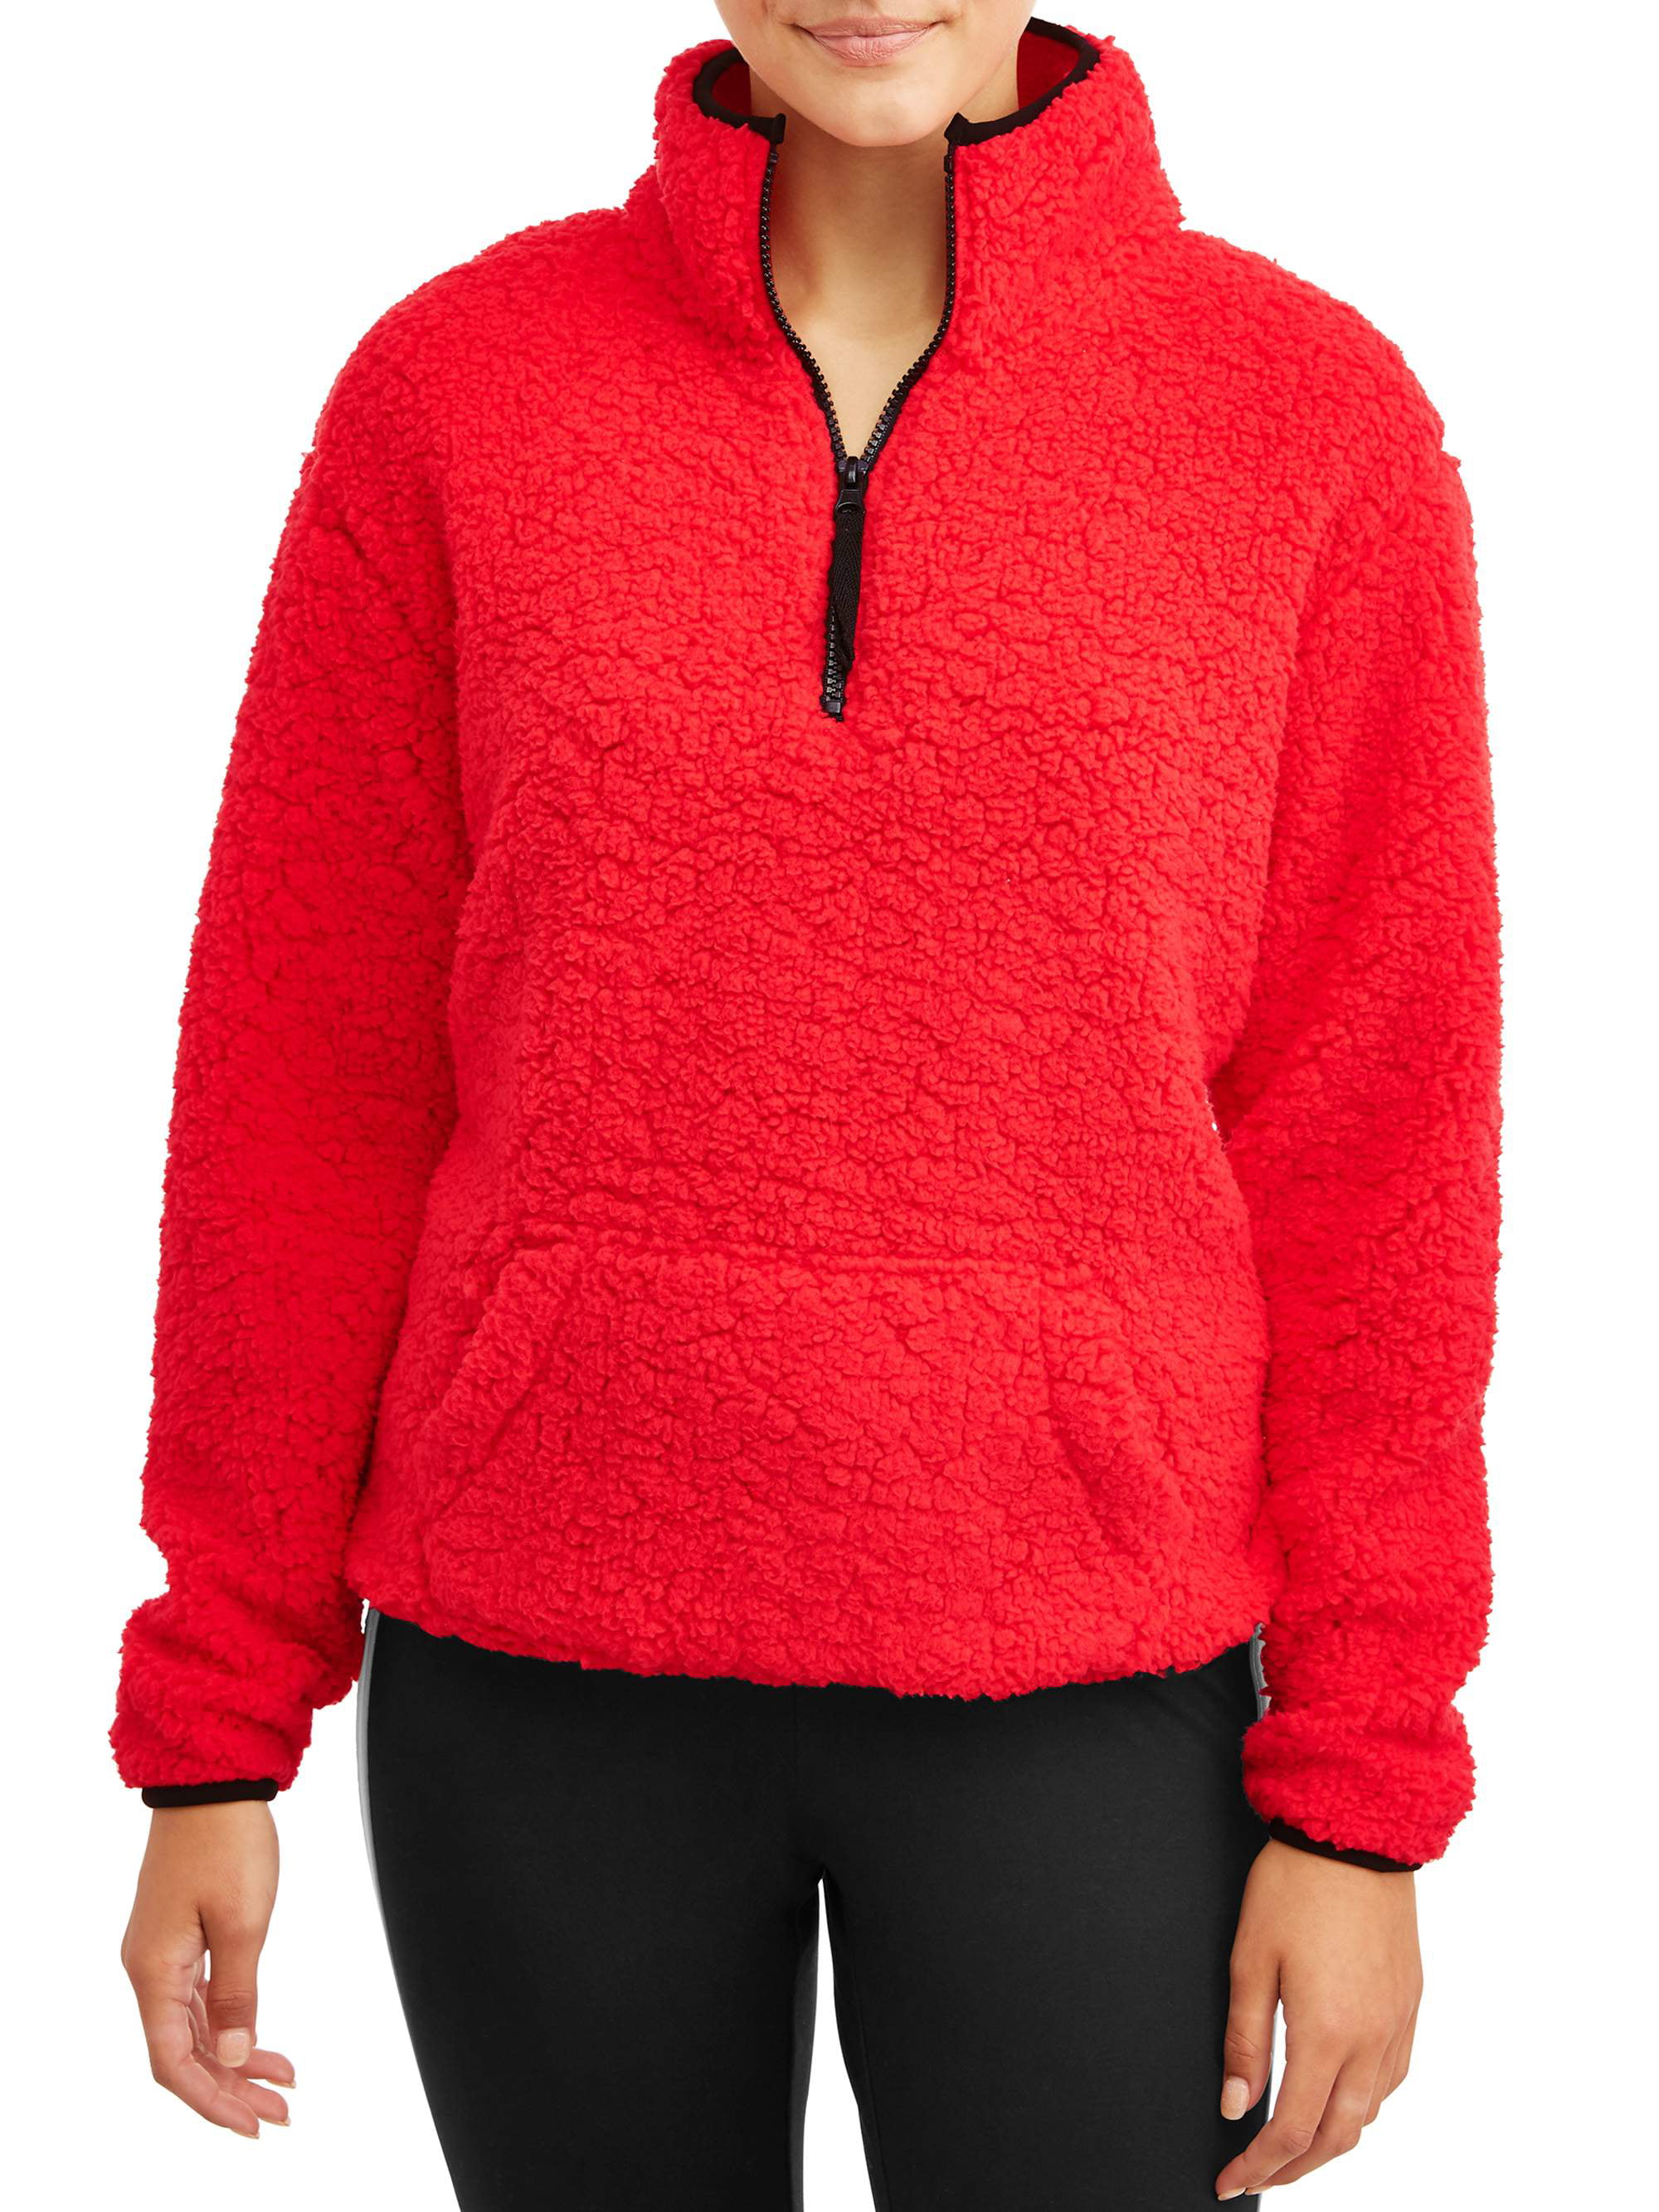 sz 18 mo Details about   Jumping Beans Sherpa 1/4 Zip Jacket NWT Free Shipping Red/Black